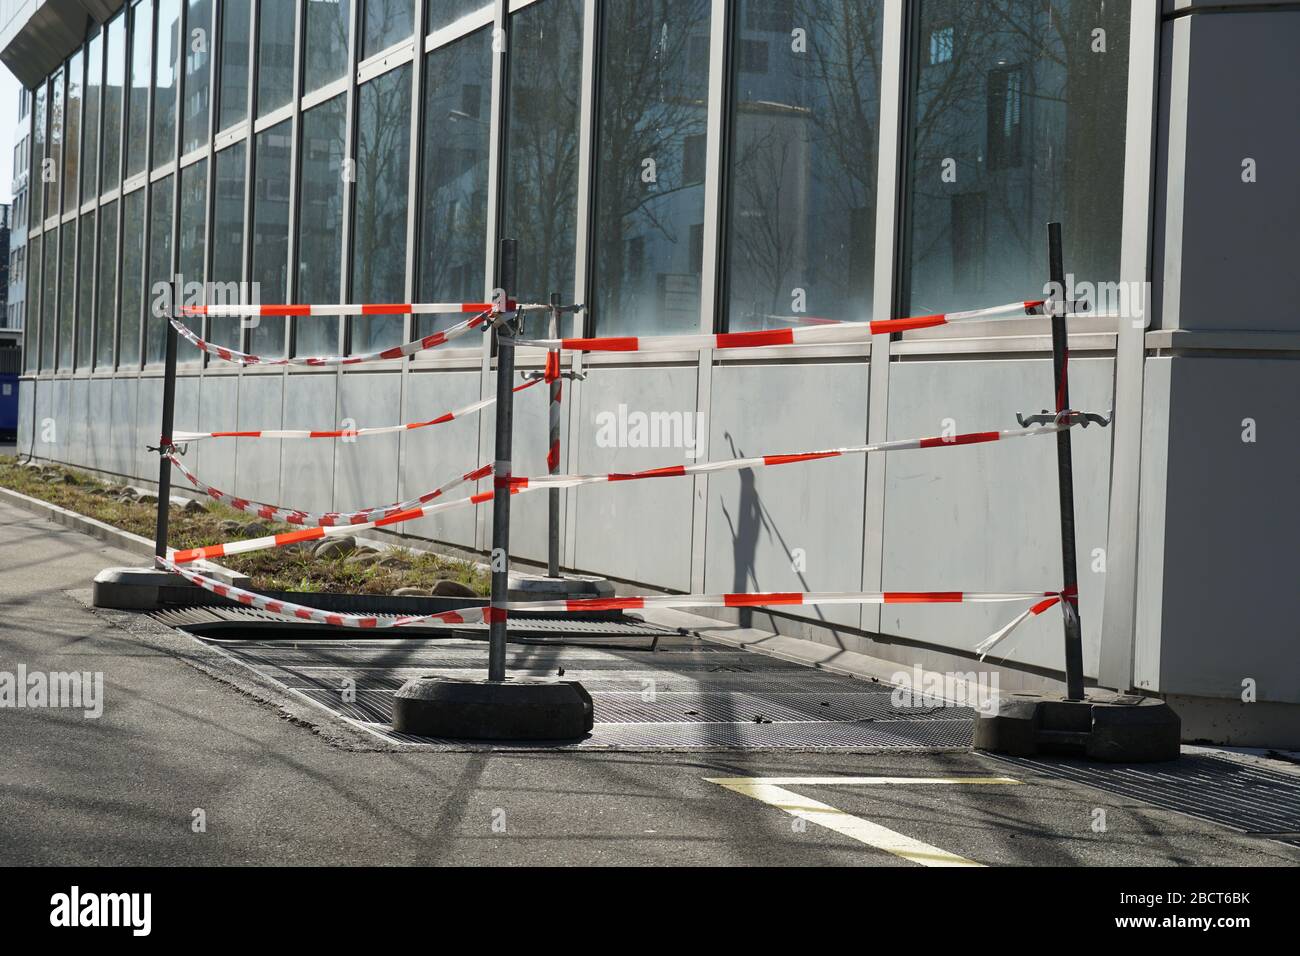 Ventilation shaft or air outlet on the street with a metal grid bordered by red and white barrier tape beside an industrial building. The shaft defect. Stock Photo